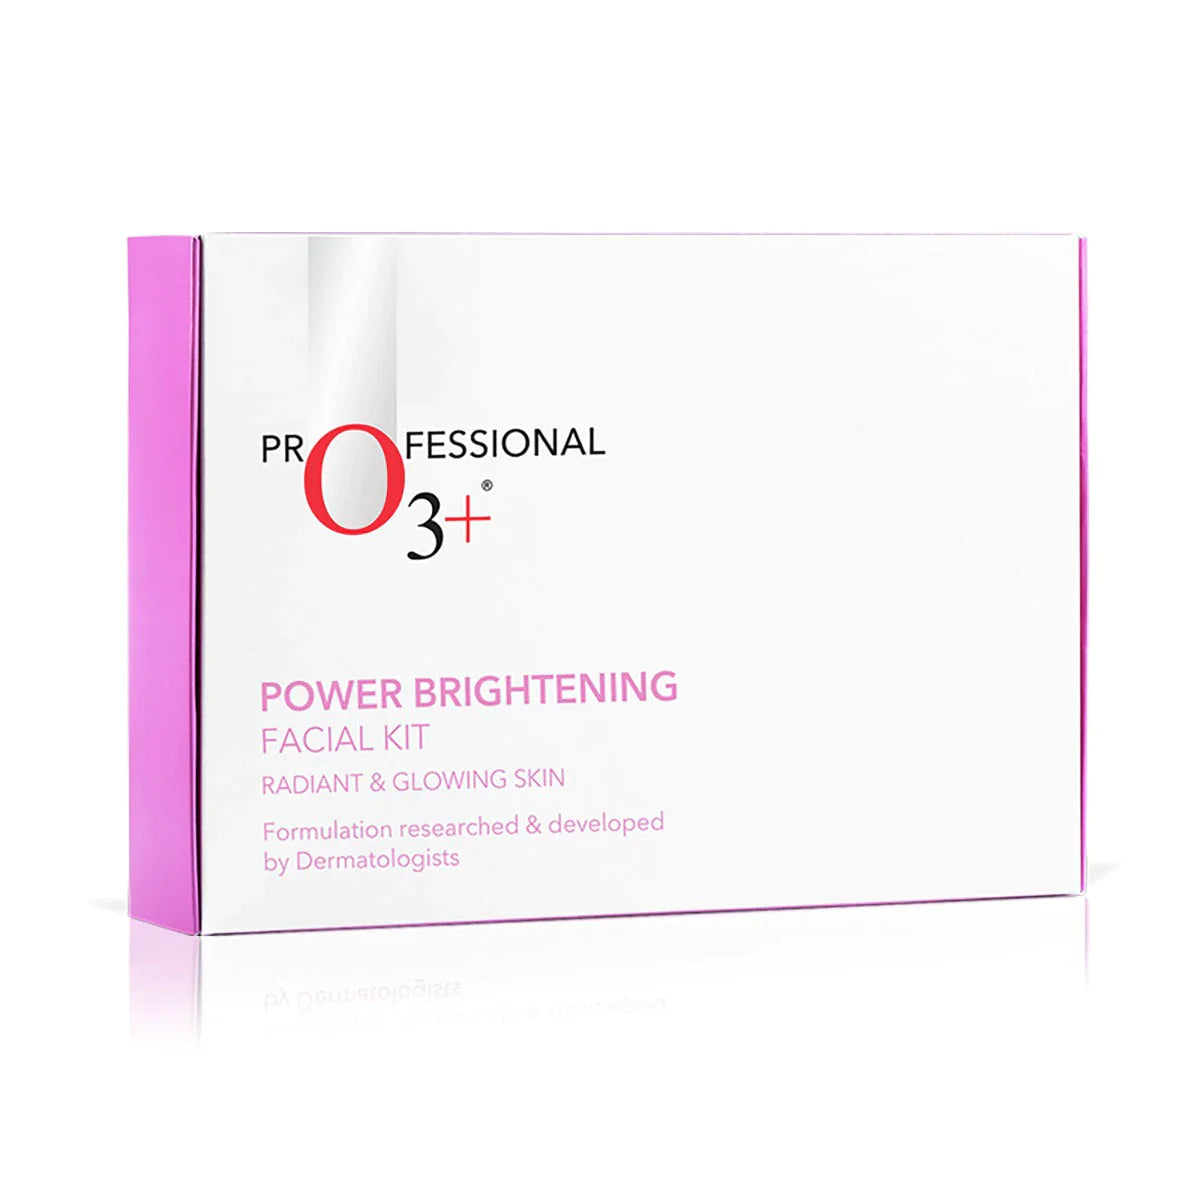 O3+ Power Brightening Facial Kit for Dirt, Dust and Dead Skin facial Kits from O3+